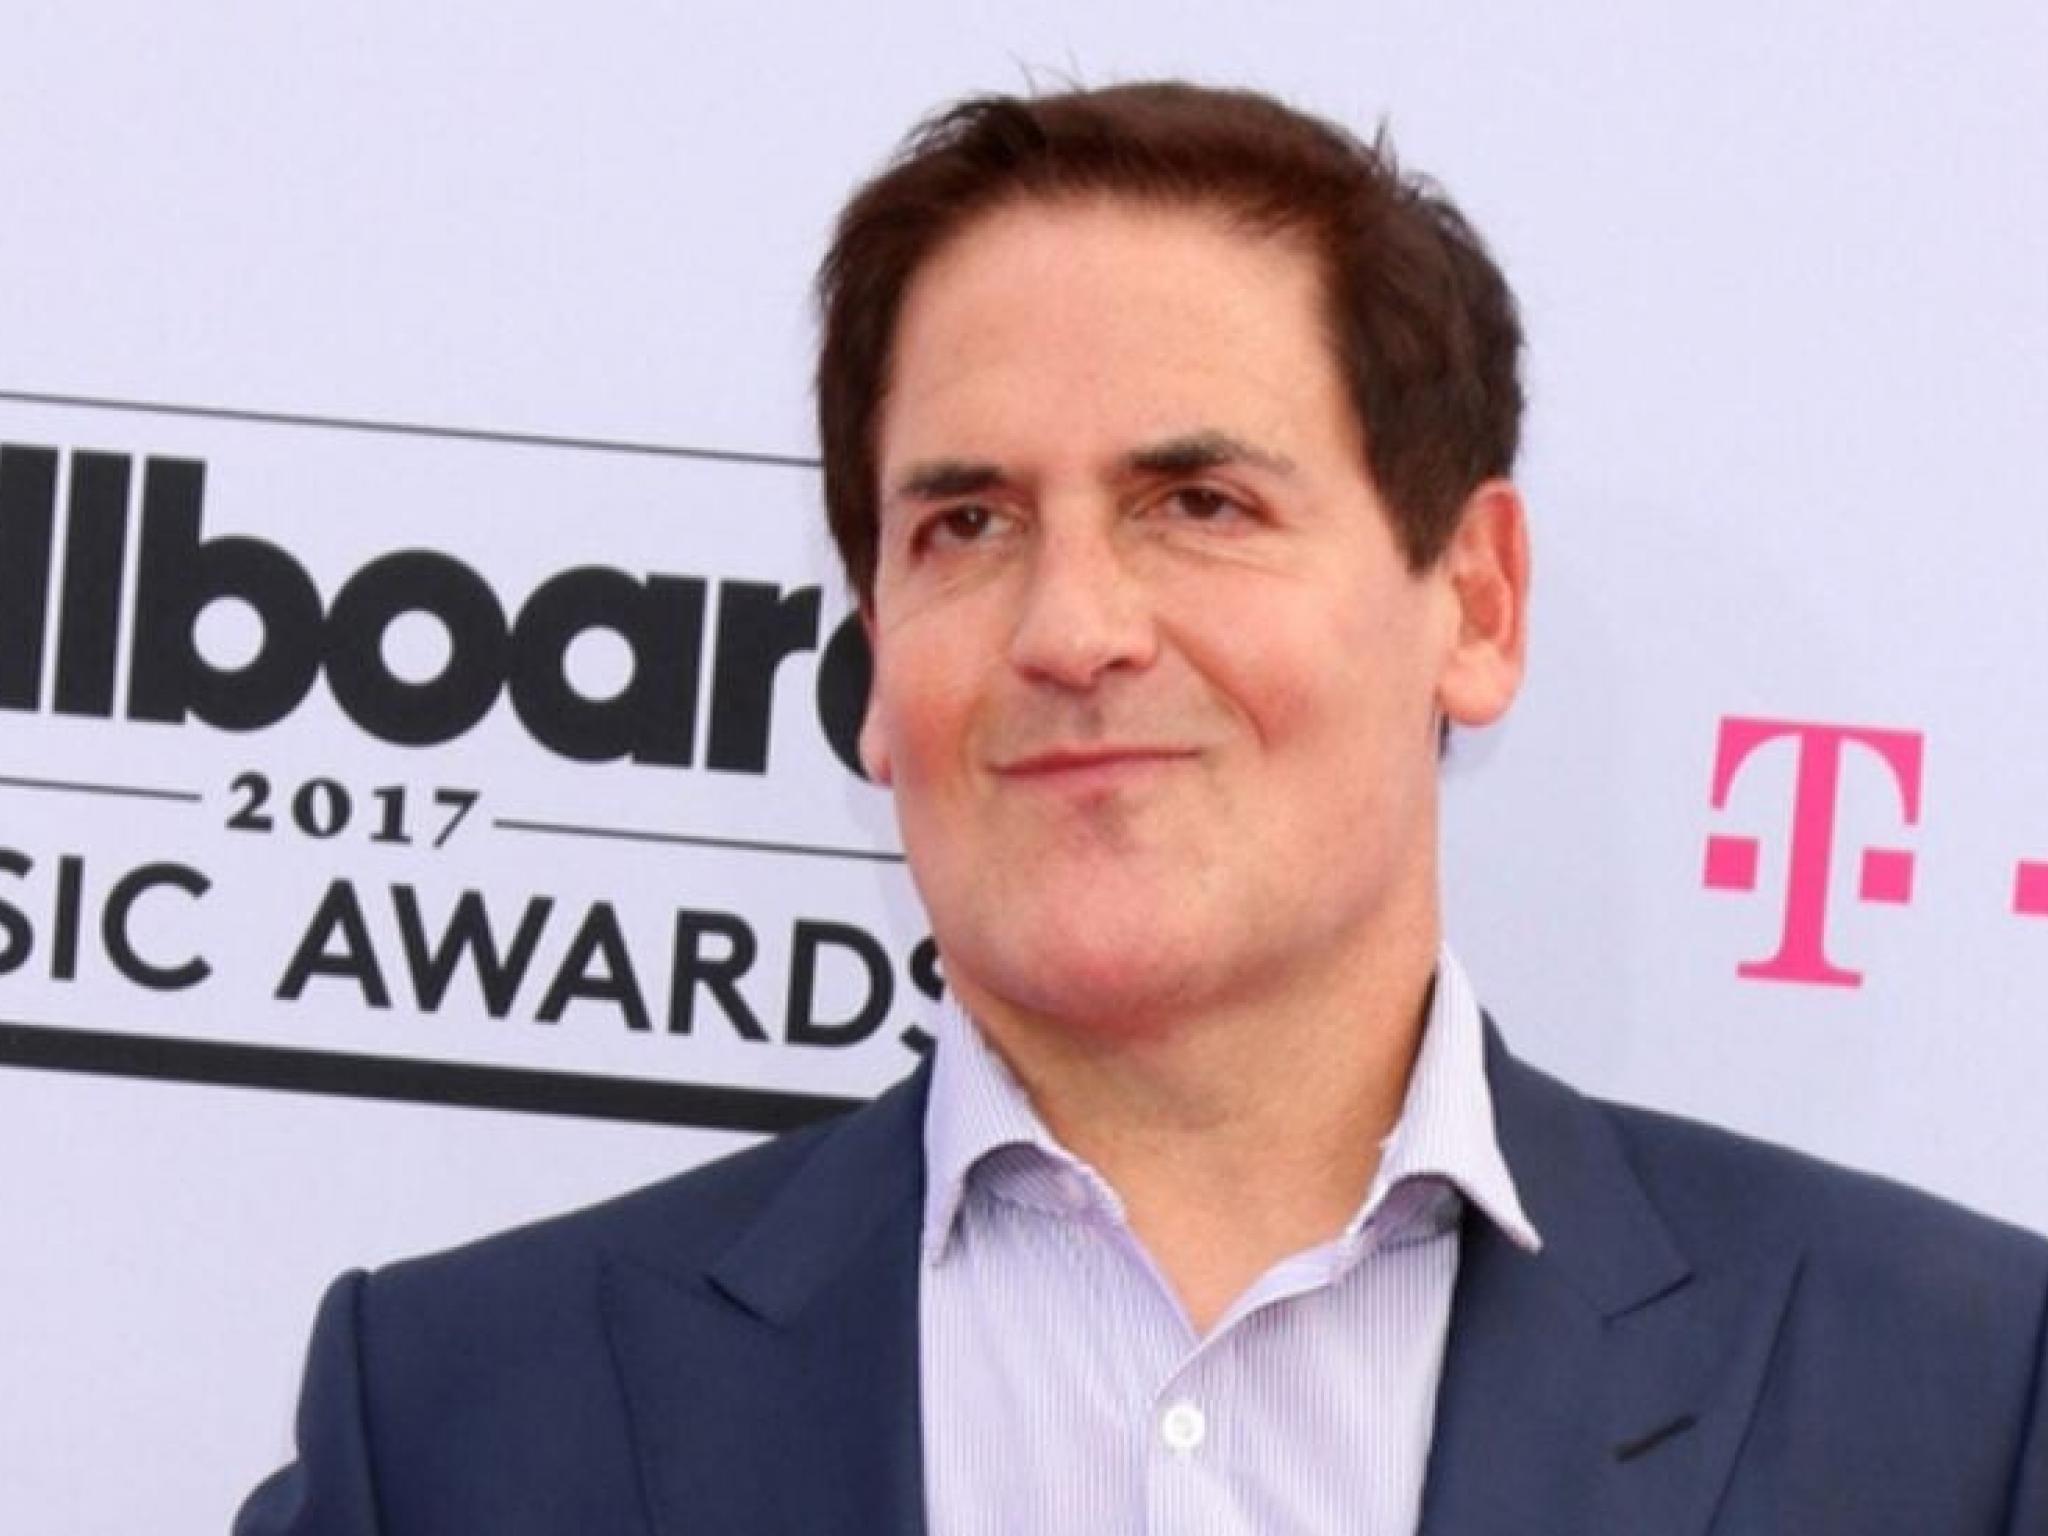  mark-cuban-ready-to-bet-on-ethereum-based-polymarket-about-trumps-chances-of-doing-a-great-big-belly-laugh-asks-jd-vance-if-hes-in 